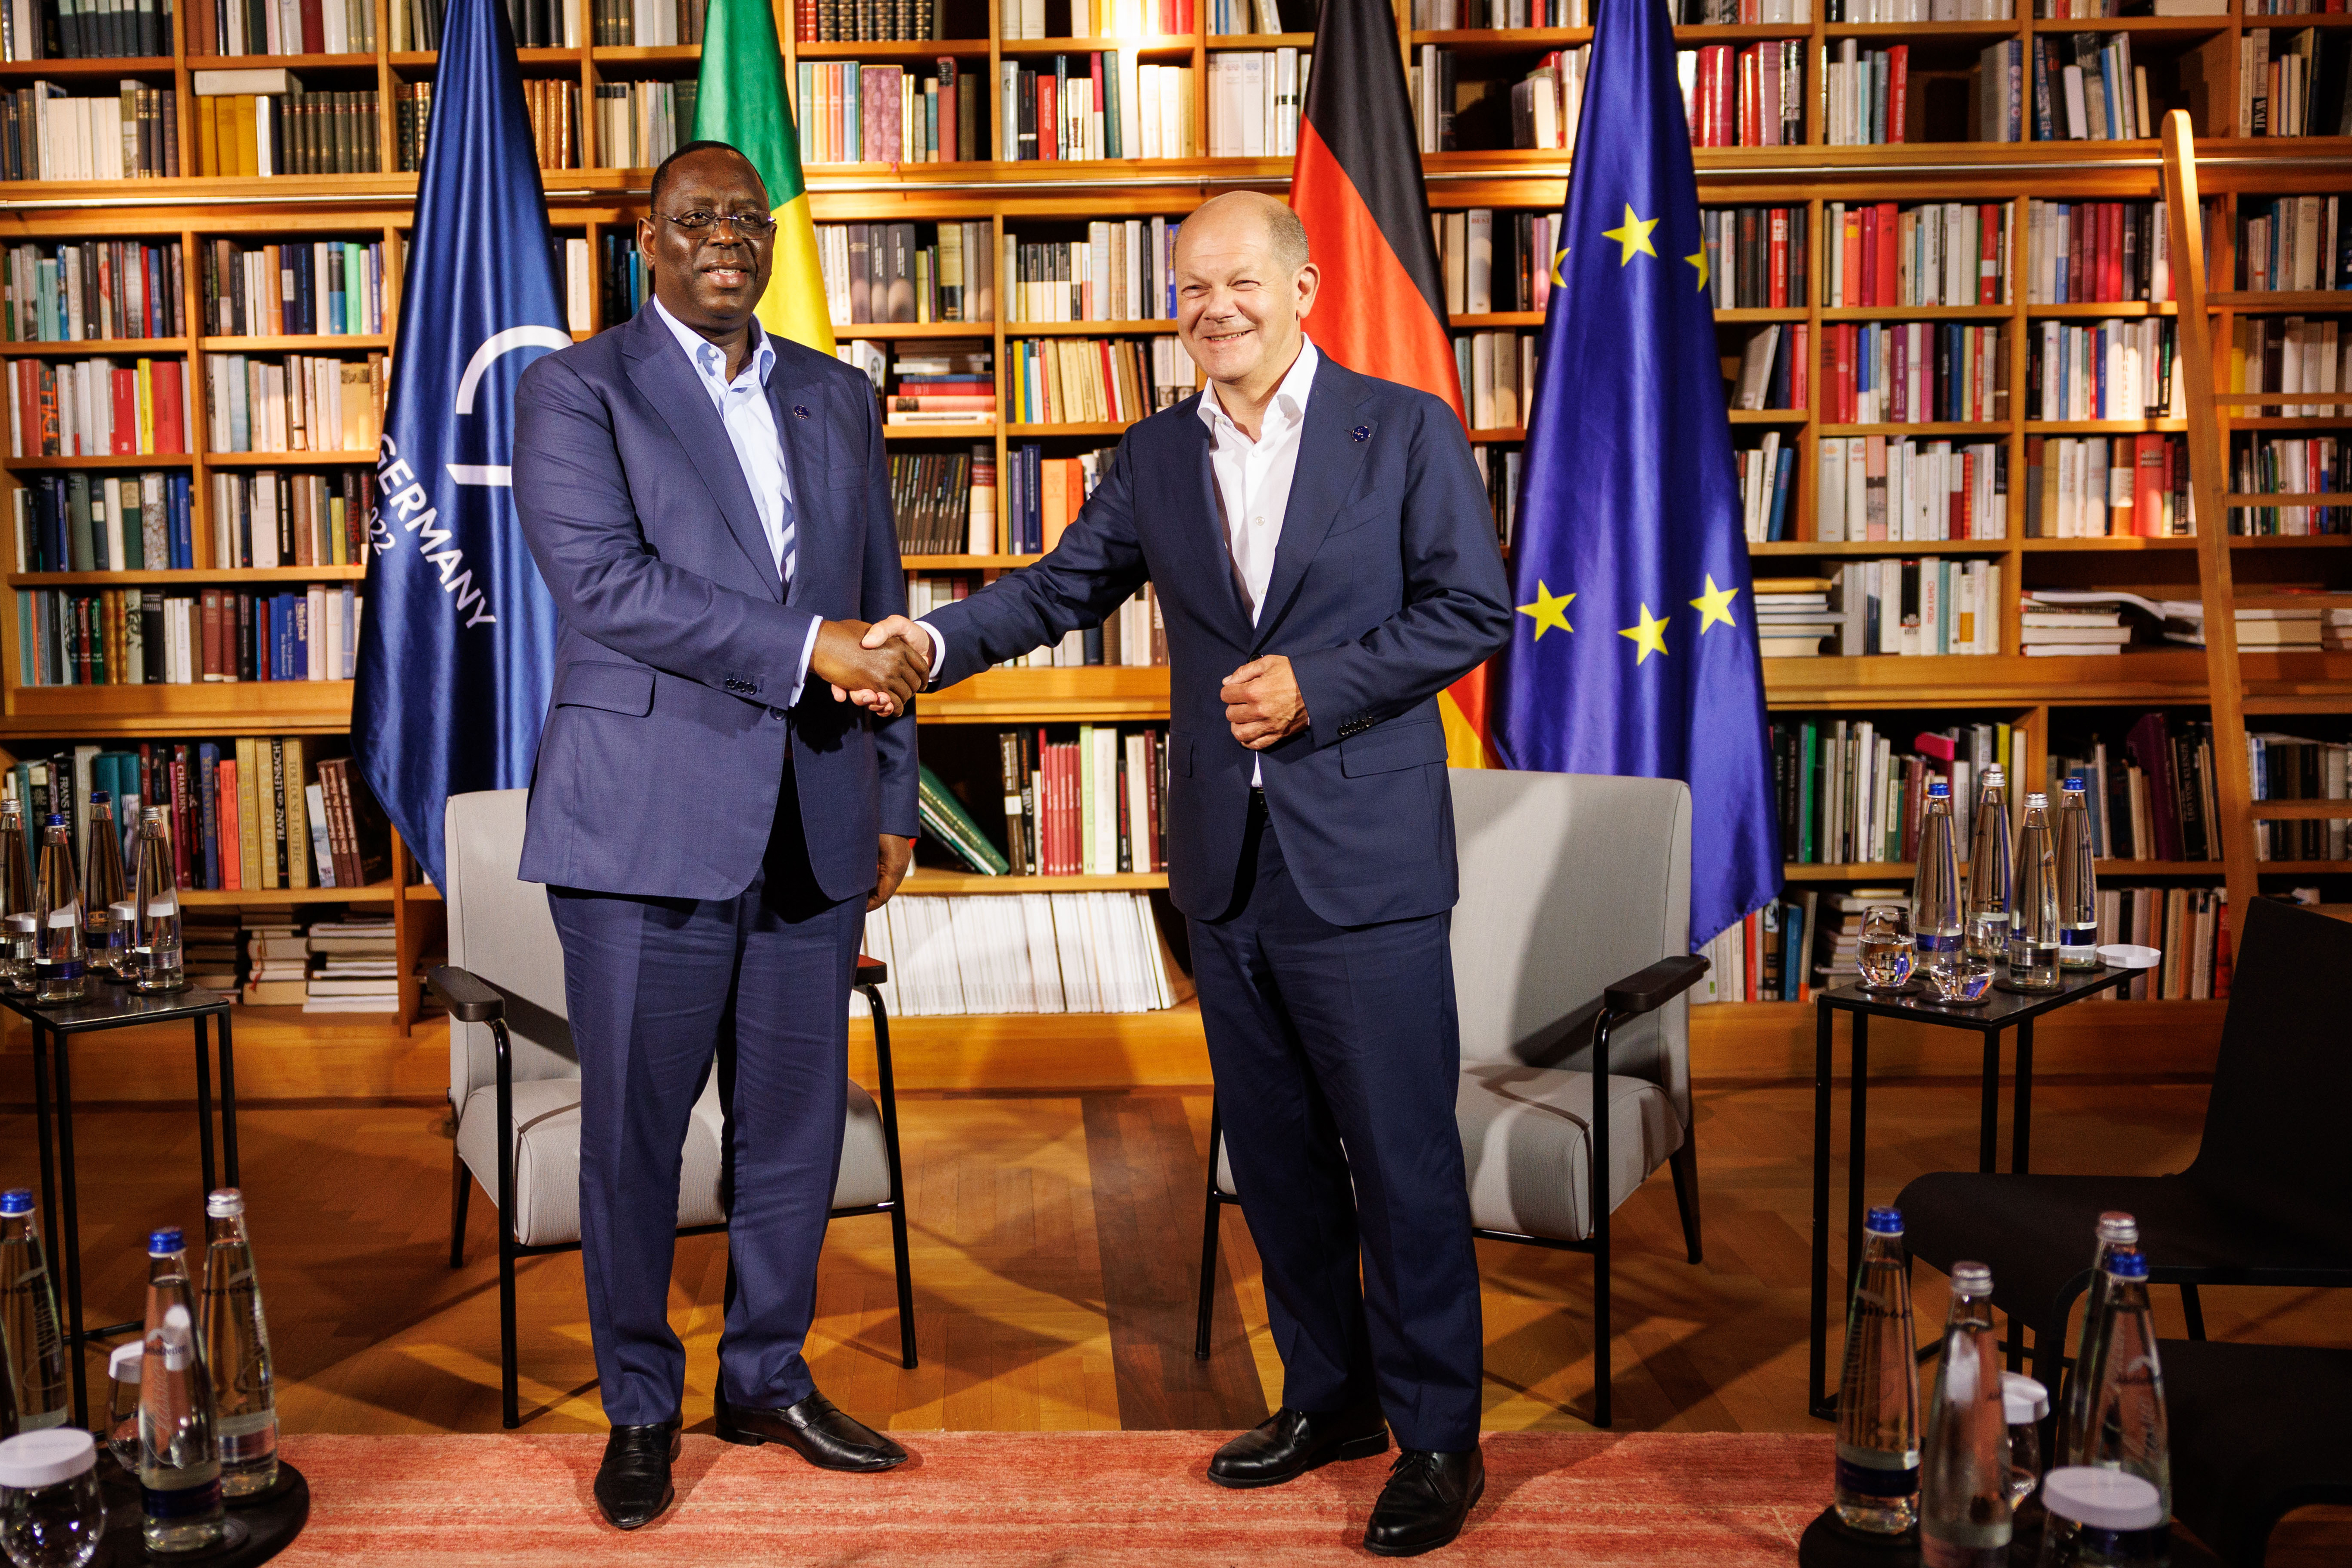 Bilateral meeting between Federal Chancellor Olaf Scholz and President Macky Sall of Senegal, currently chairperson of the African Union (AU), in Schloss Elmau.